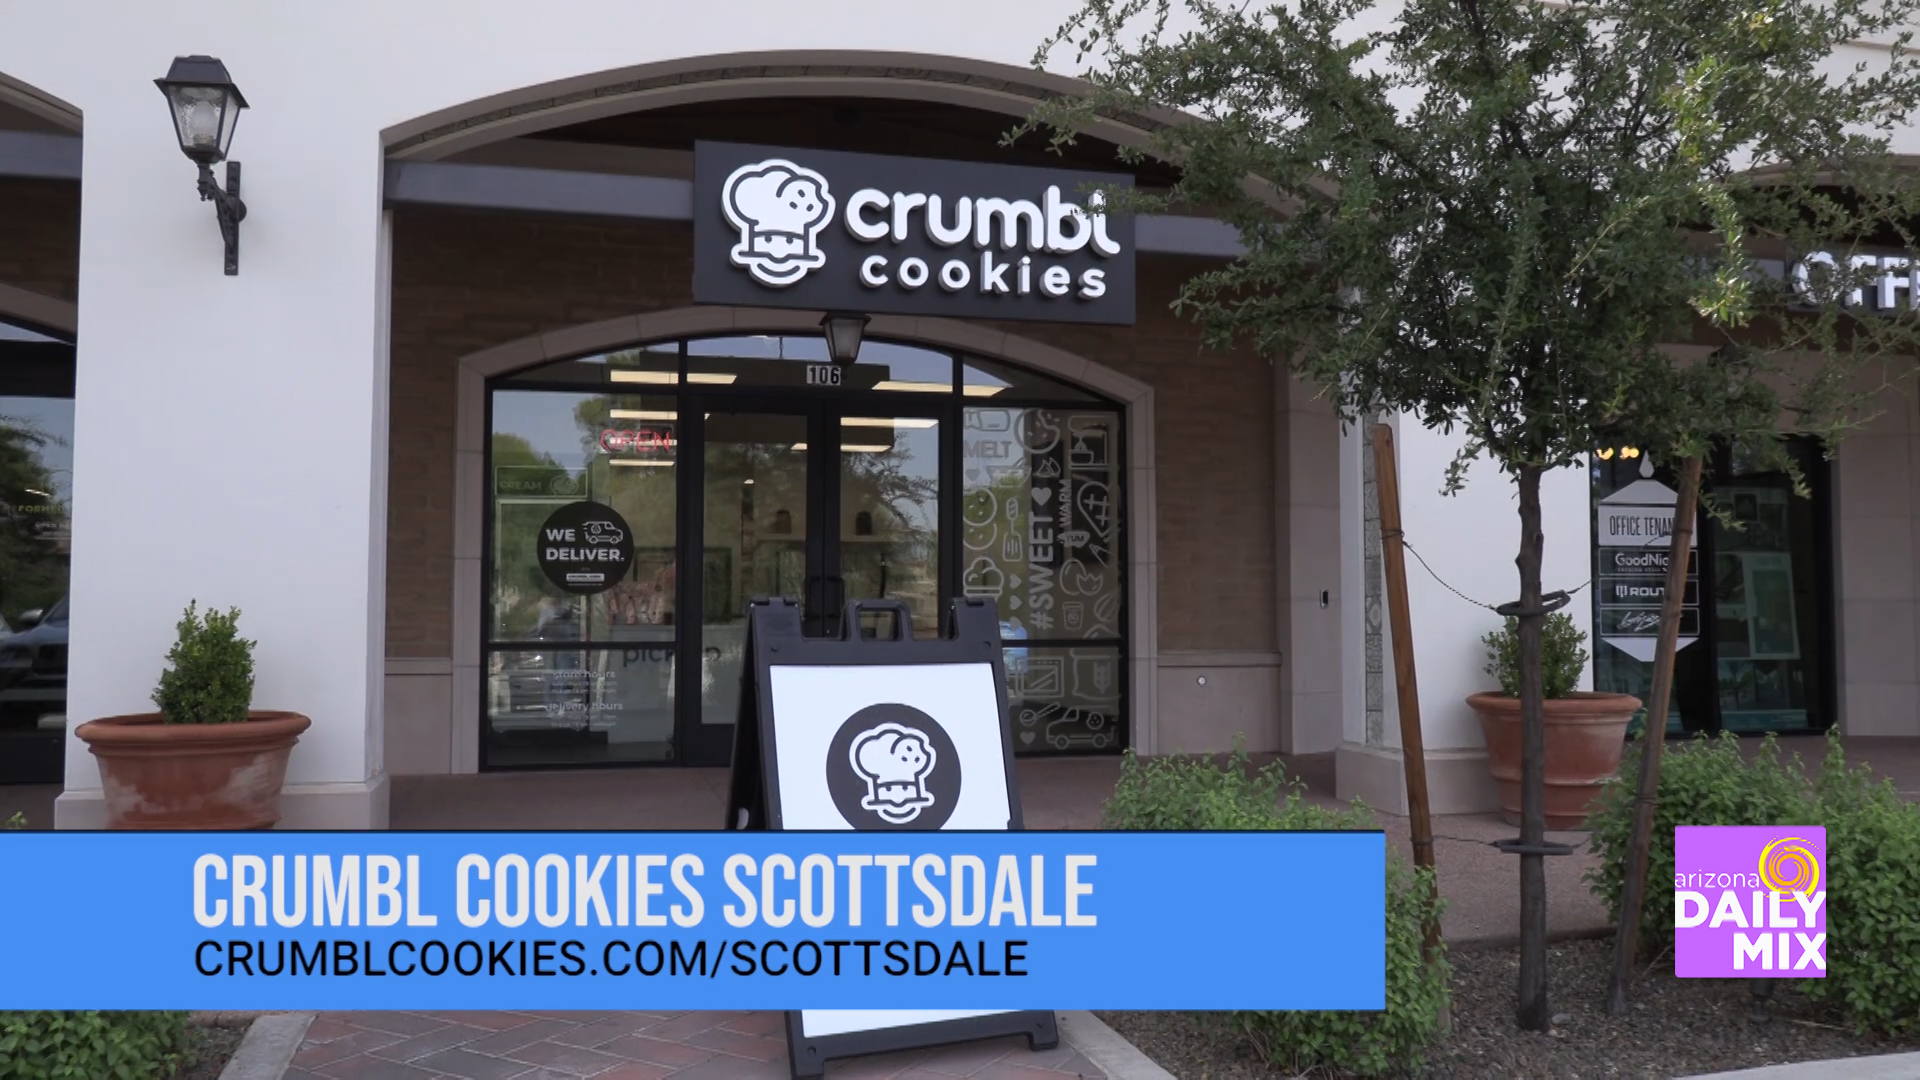 Crumbl Cookies Scottsdale is Stuffing the Bus